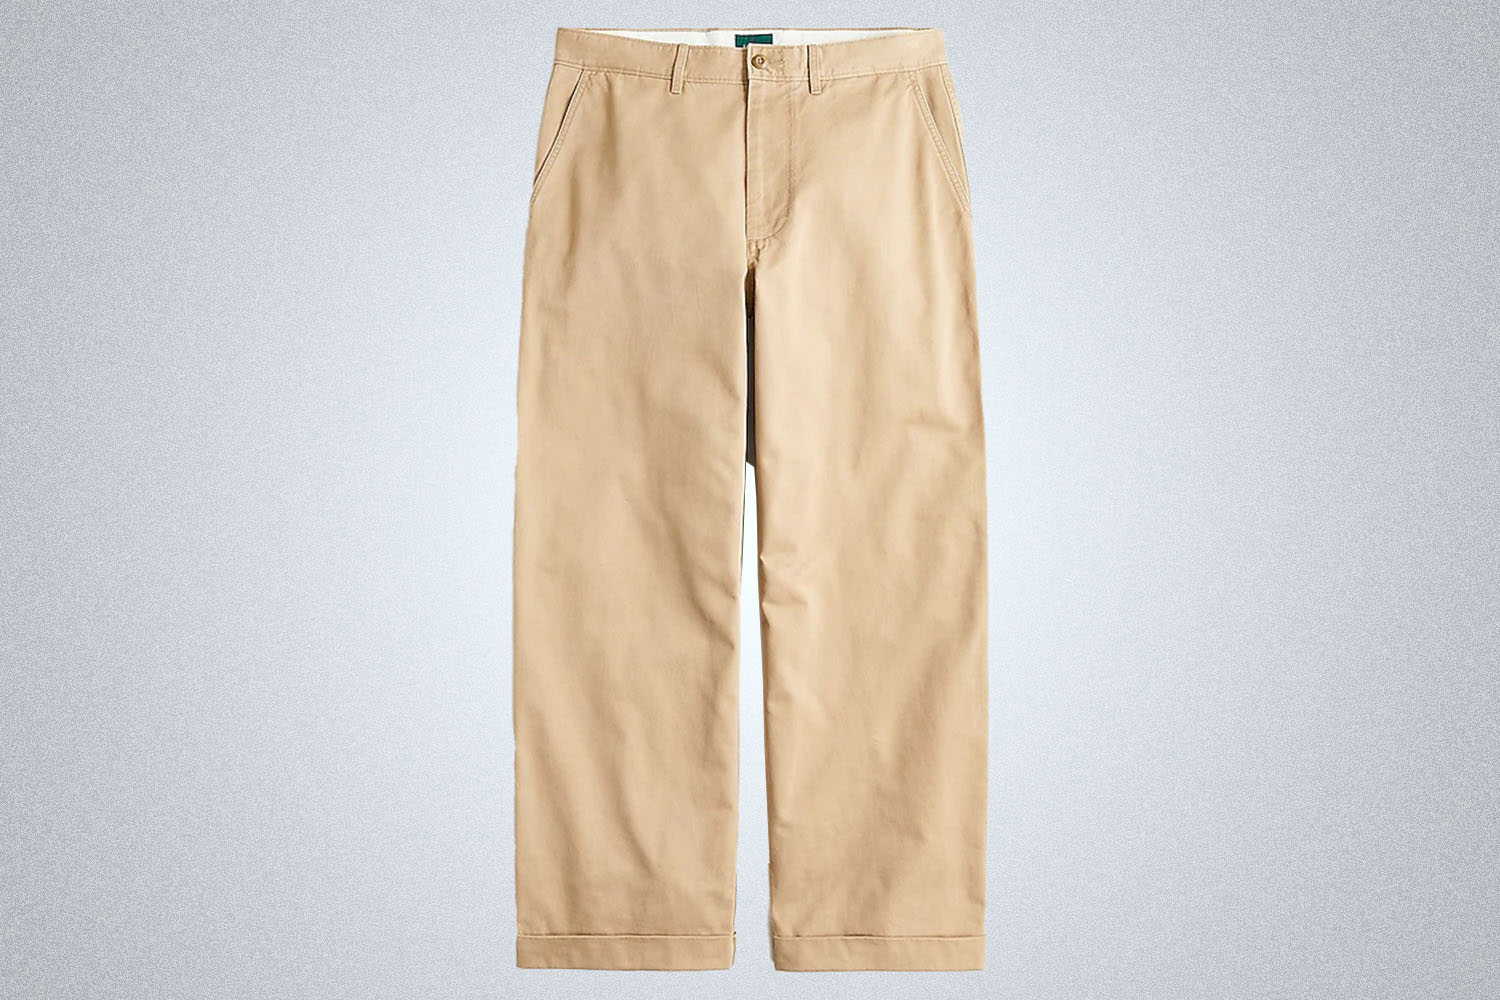 J.Crew Giant-Fit Chino Pant in Dusty Khaki 